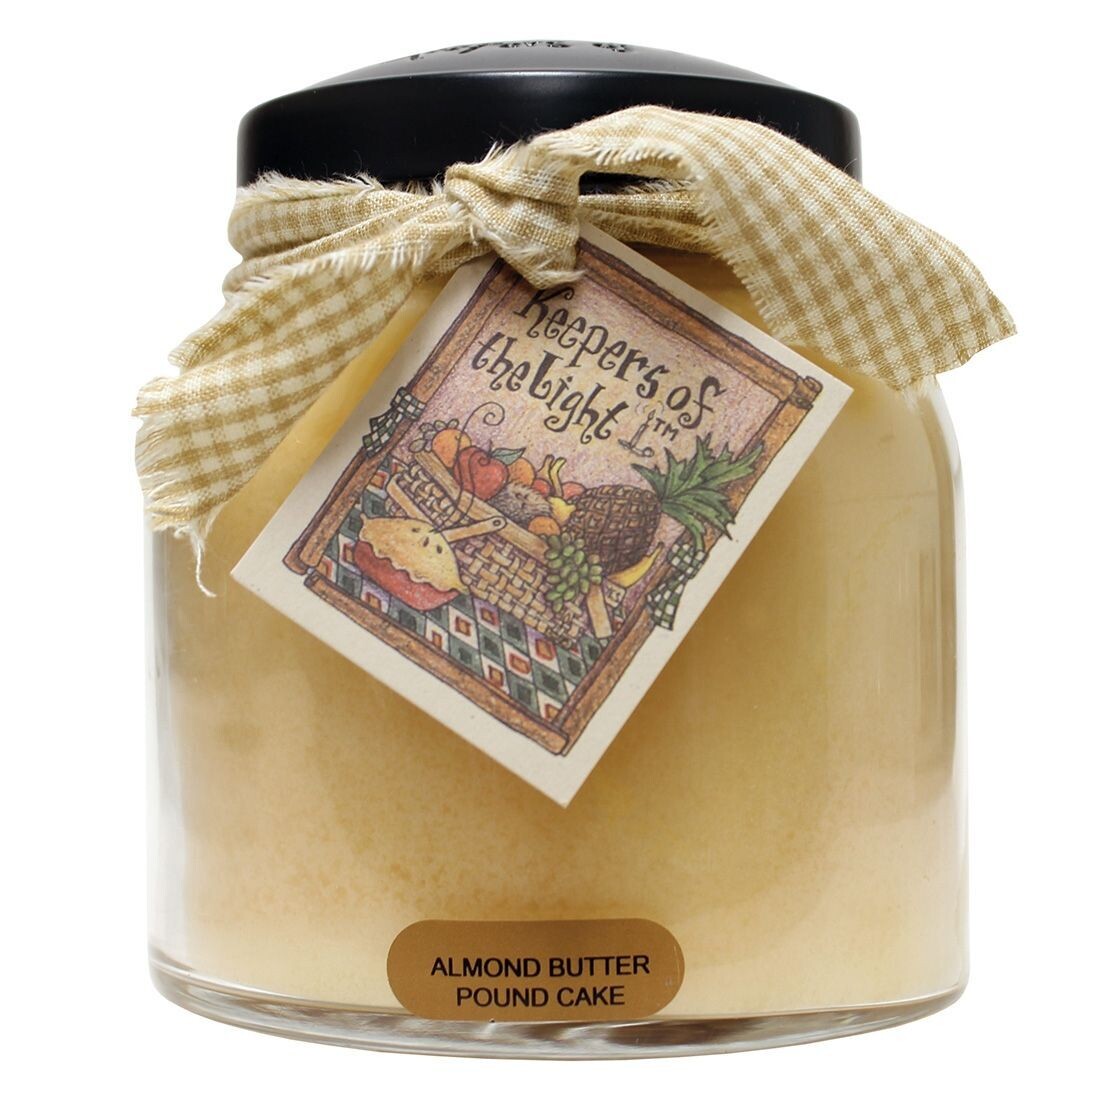 Almond Butter Pound Cake - Papa Jar - 34 oz - Double Wick - Keepers of the Light Candle